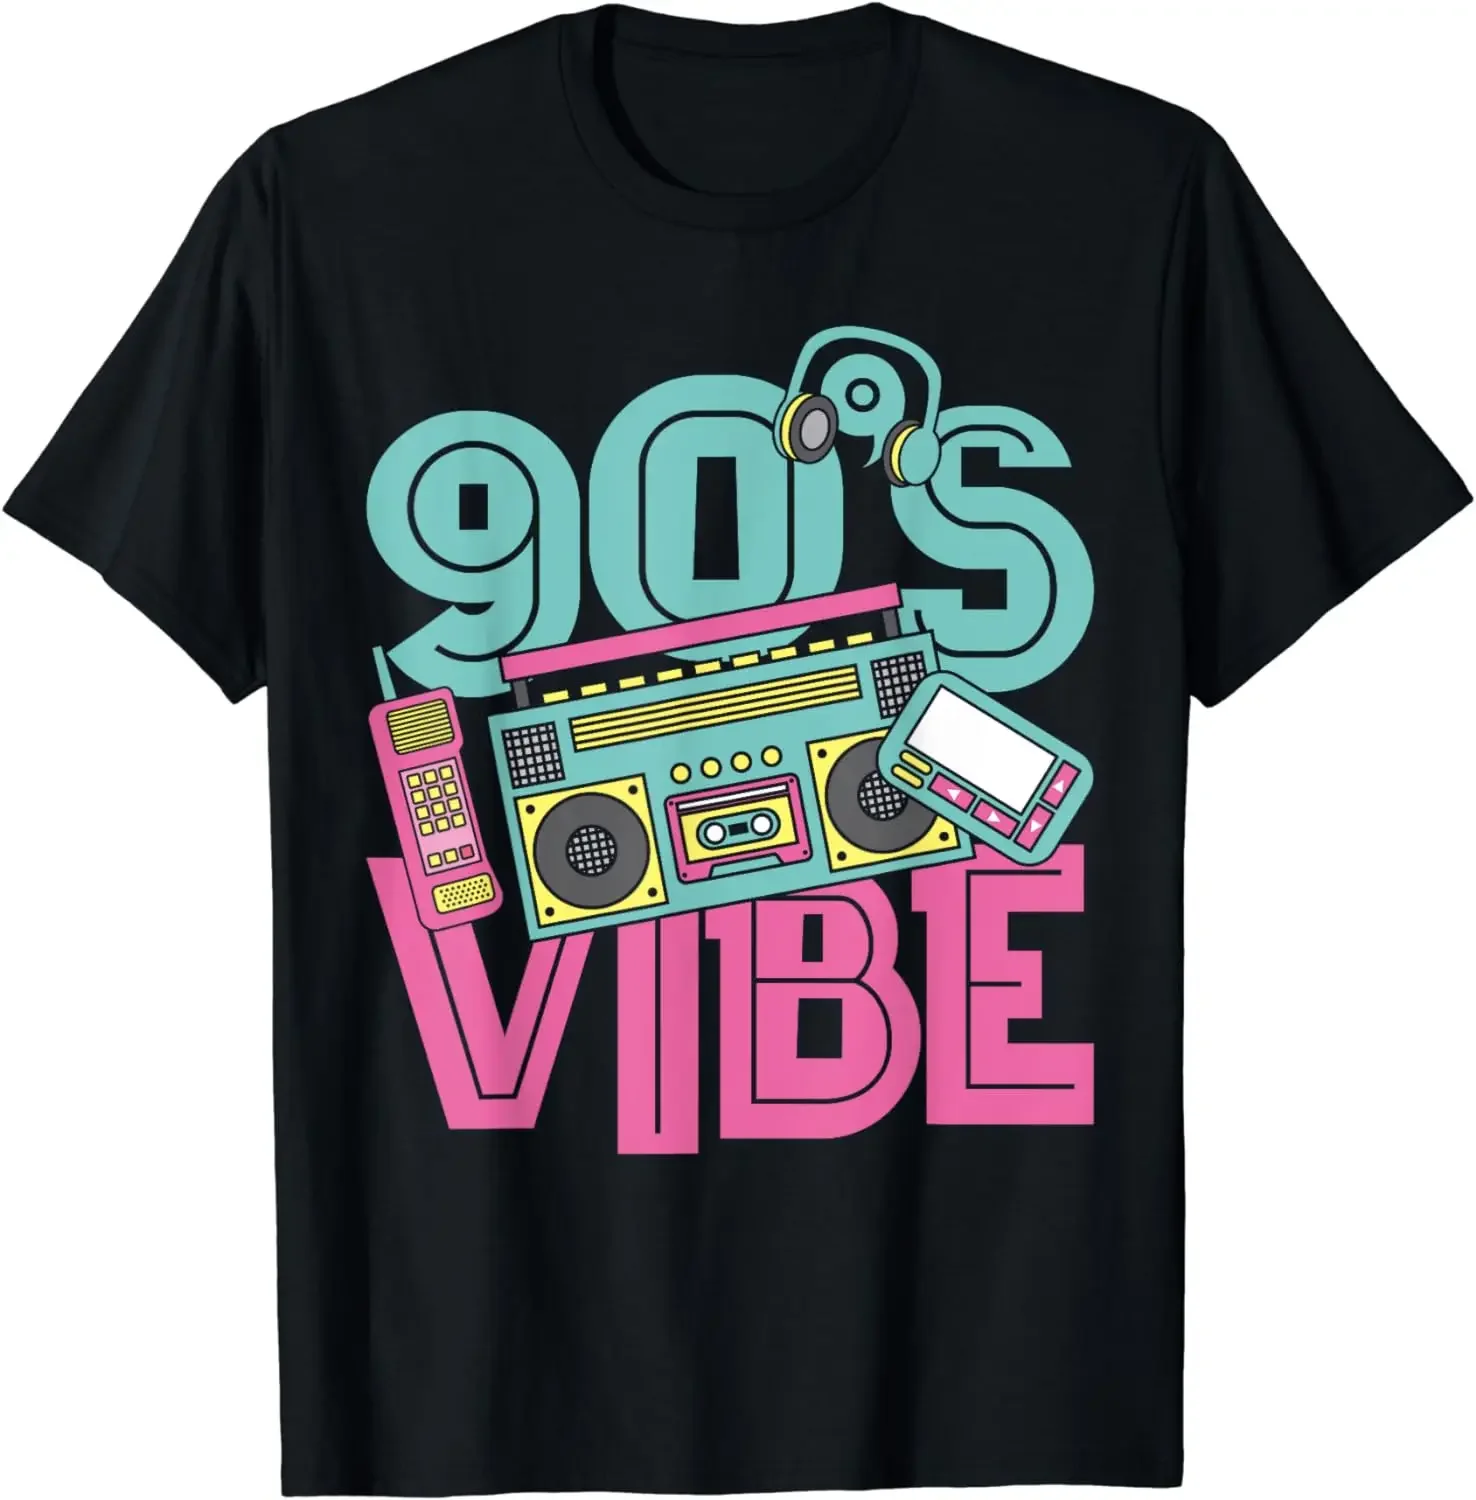 

90s Vibe Vintage 1990s Music 90s Costume Party Nineties T-Shirt Streetwear T Shirt Homme T Shirts for Men